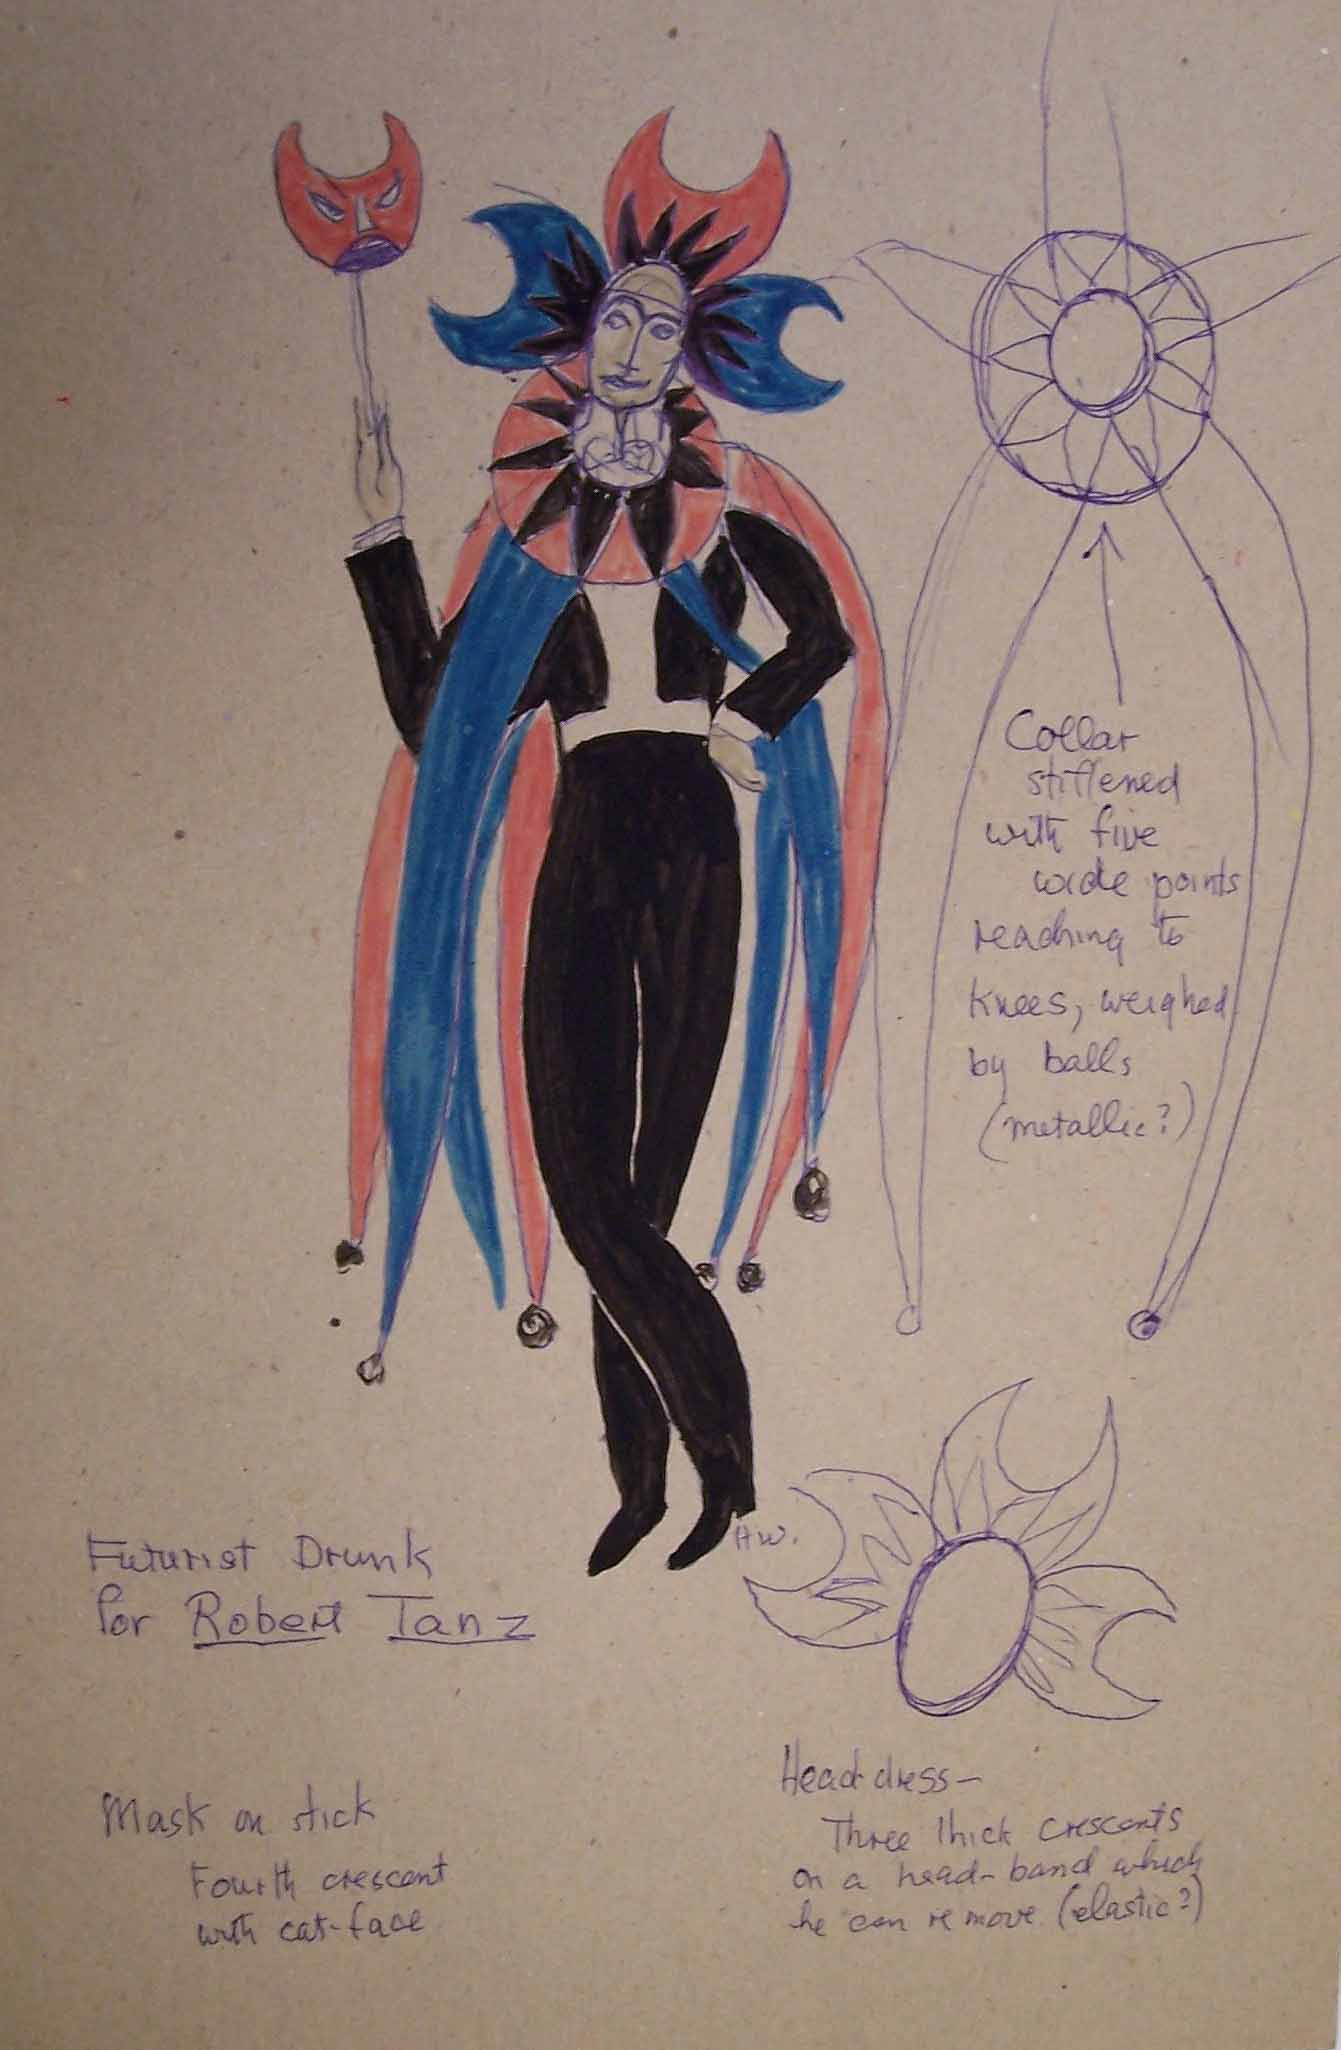 Whittaker costume design for Rules of the Game